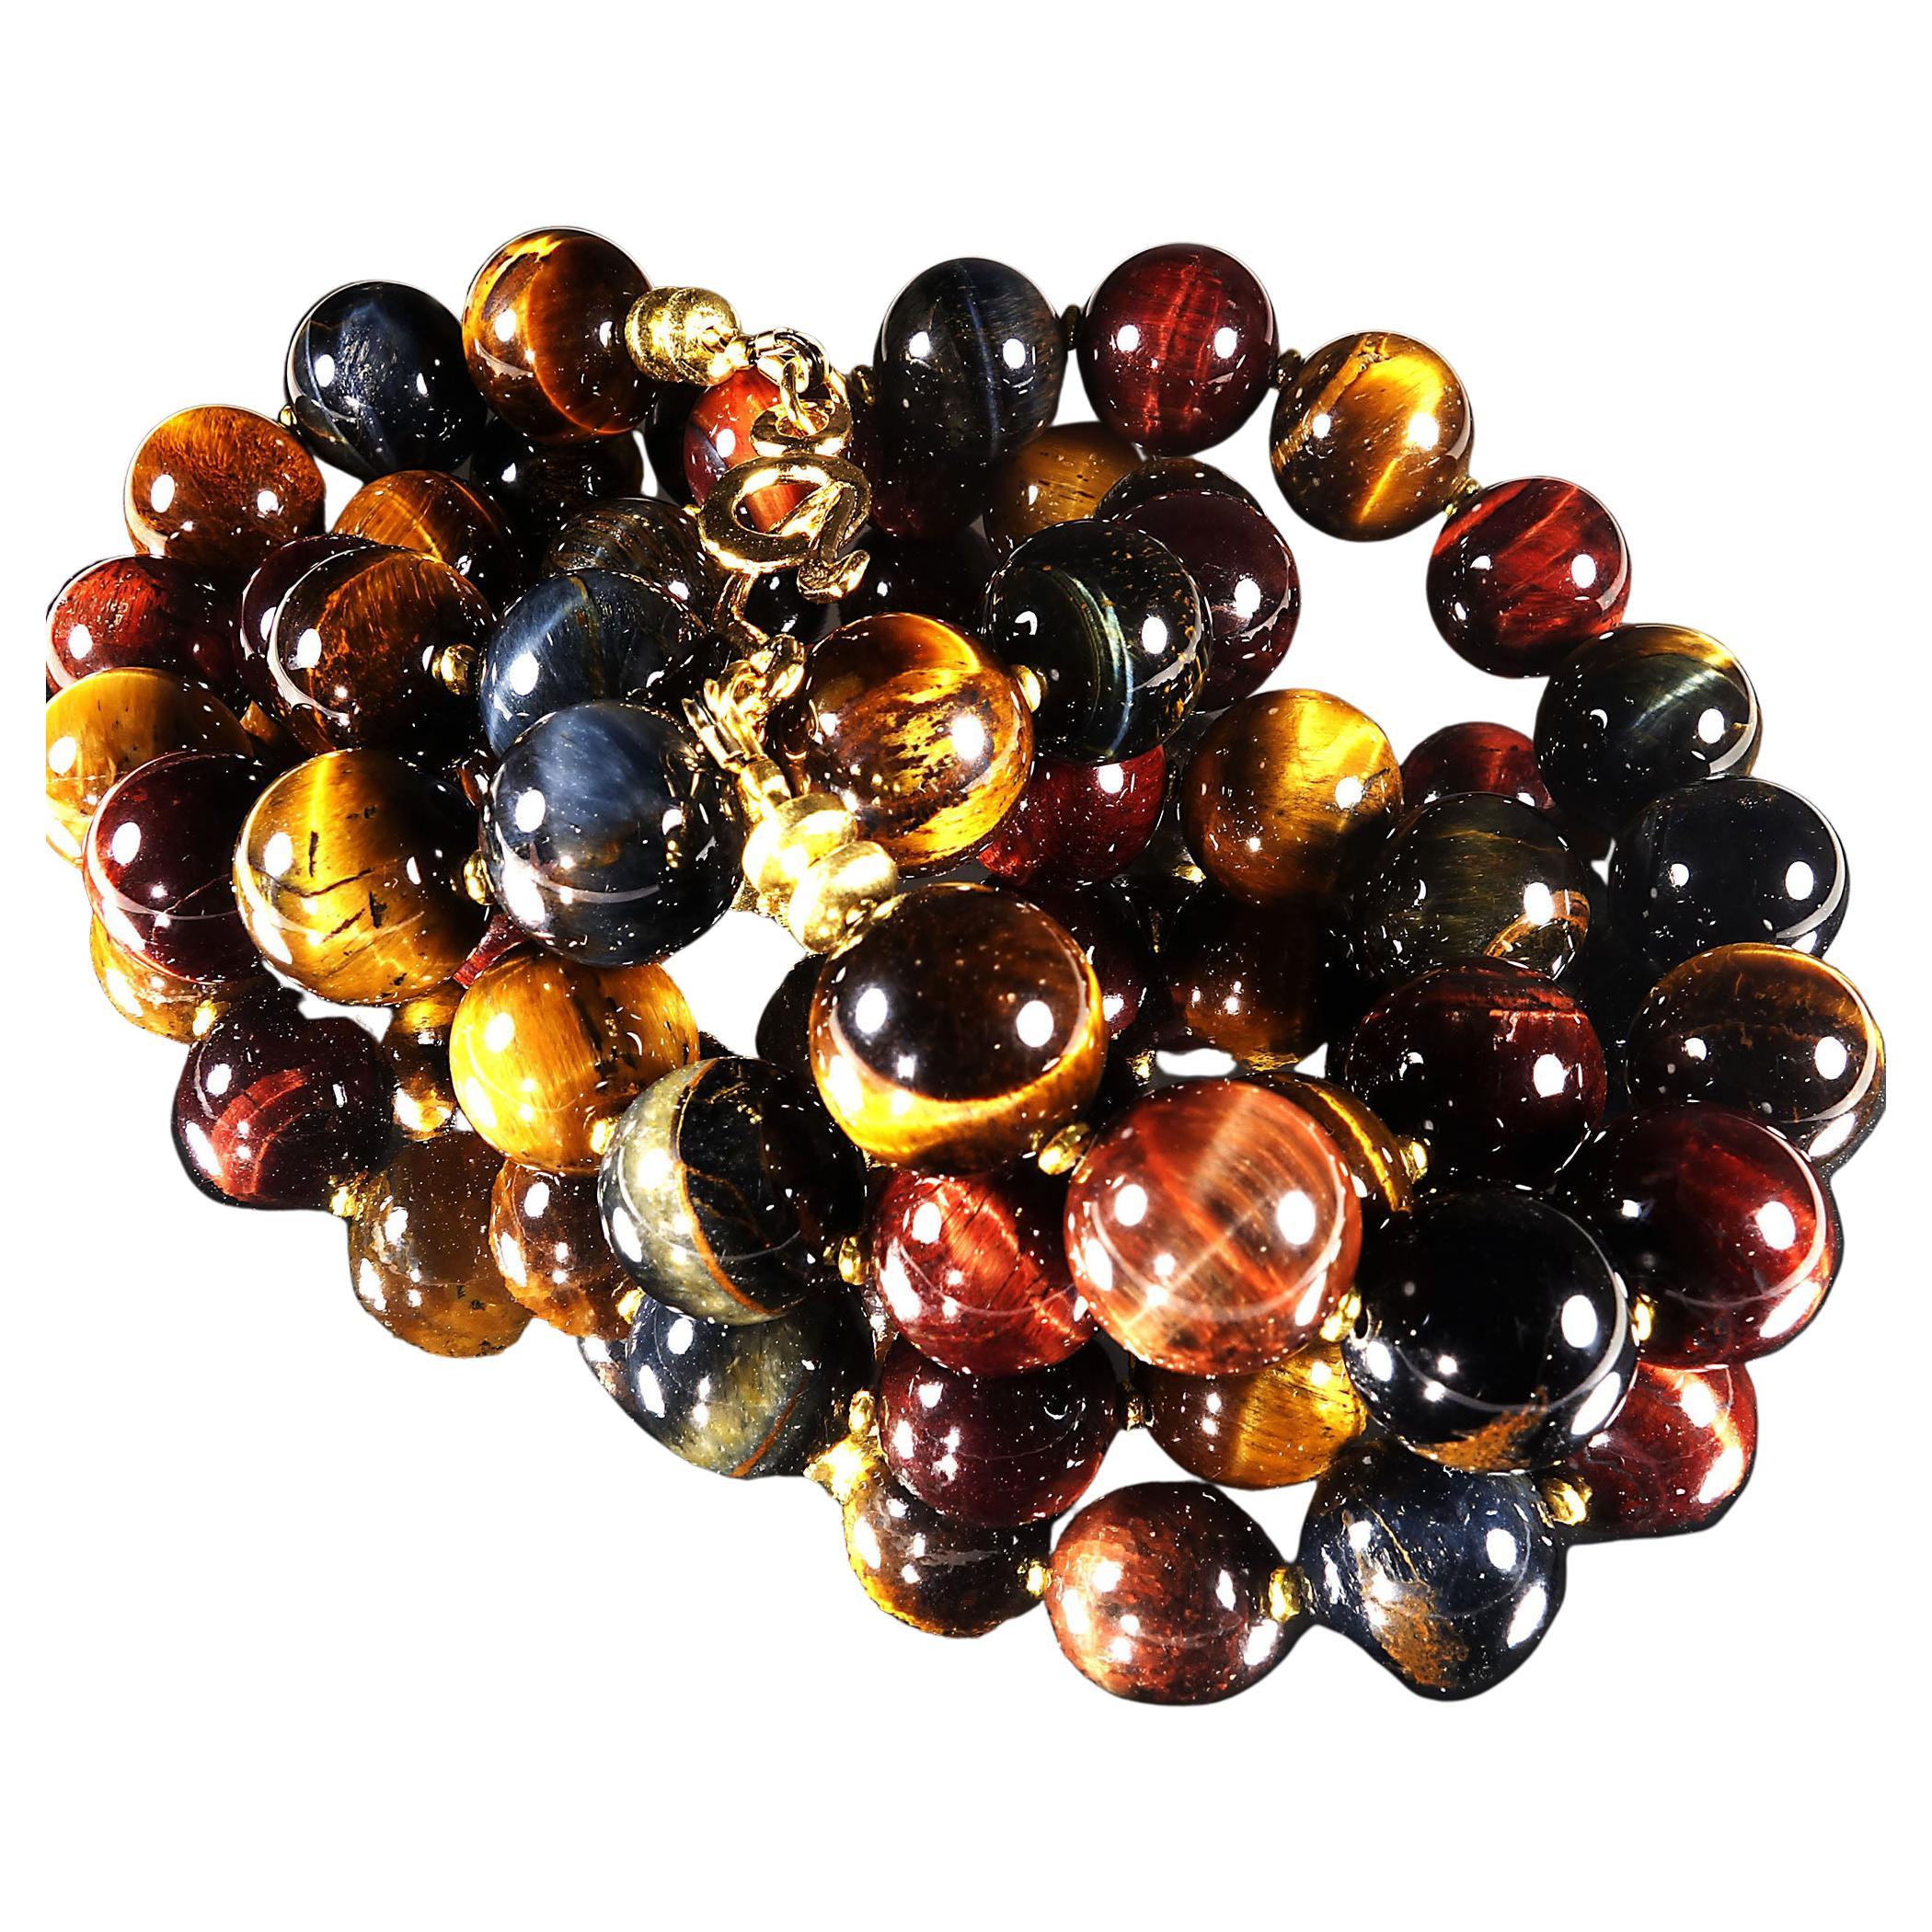 Handmade, 29 inch long multi color Tiger's Eye necklace.  This unique necklace features red, blue, gray, and golden Tiger's Eye all in 14MM rounds.  The Tiger's Eye is enhanced with gold tone rondels.  This is the perfect length to sit underneath a